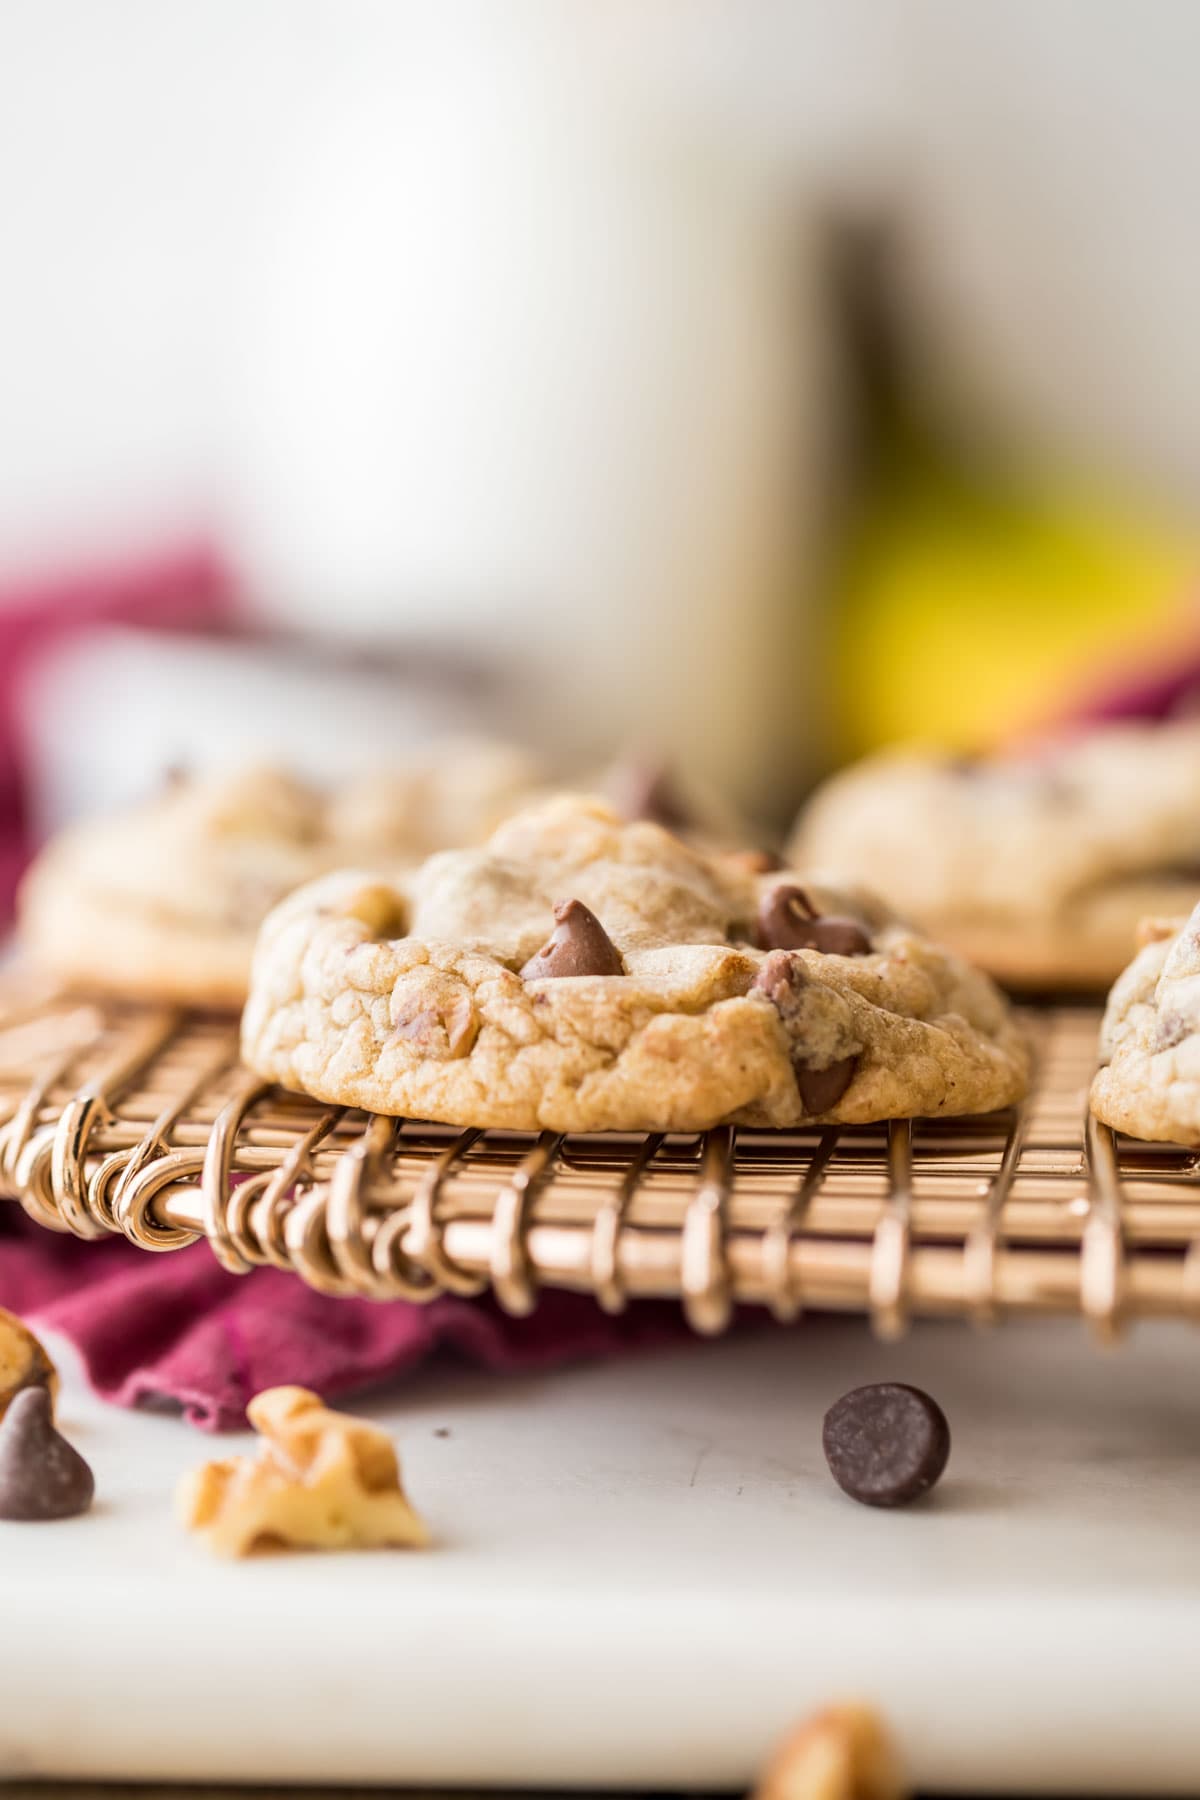 head-on view of cookies filled with walnuts and chocolate chips on a cooling rack